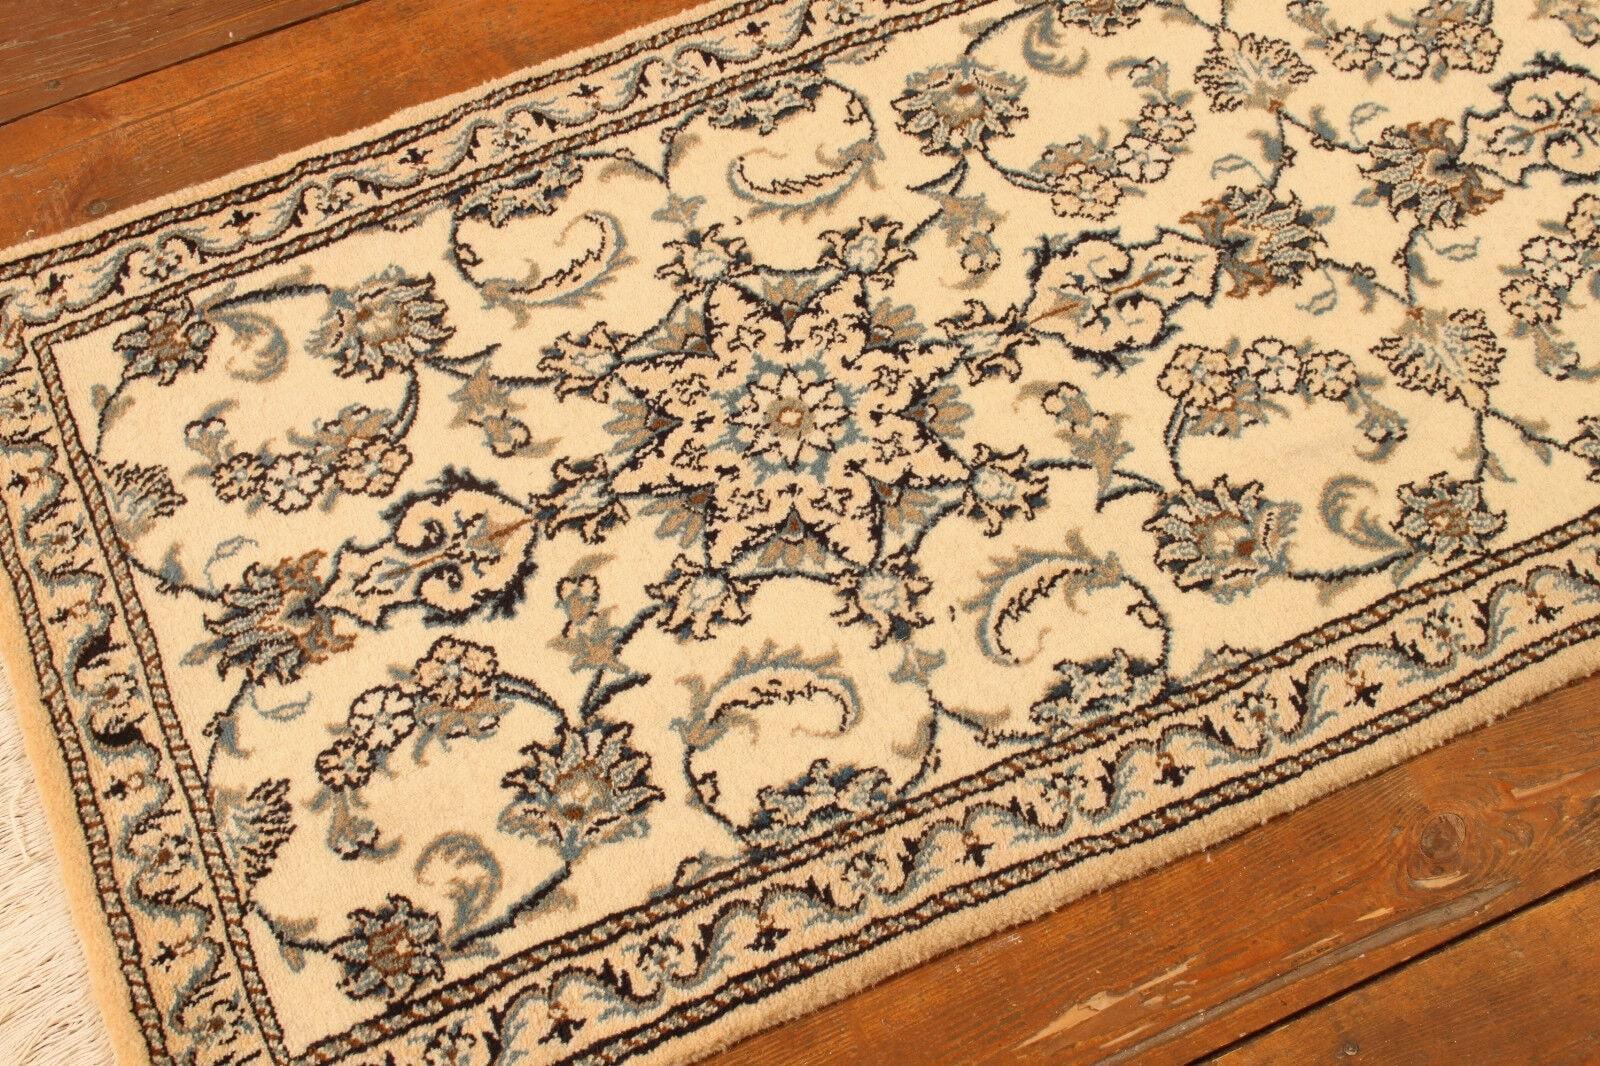 Late 20th Century Handmade Vintage Persian Style Nain Runner Rug 2.5' x 6.3', 1980s - 1T50 For Sale